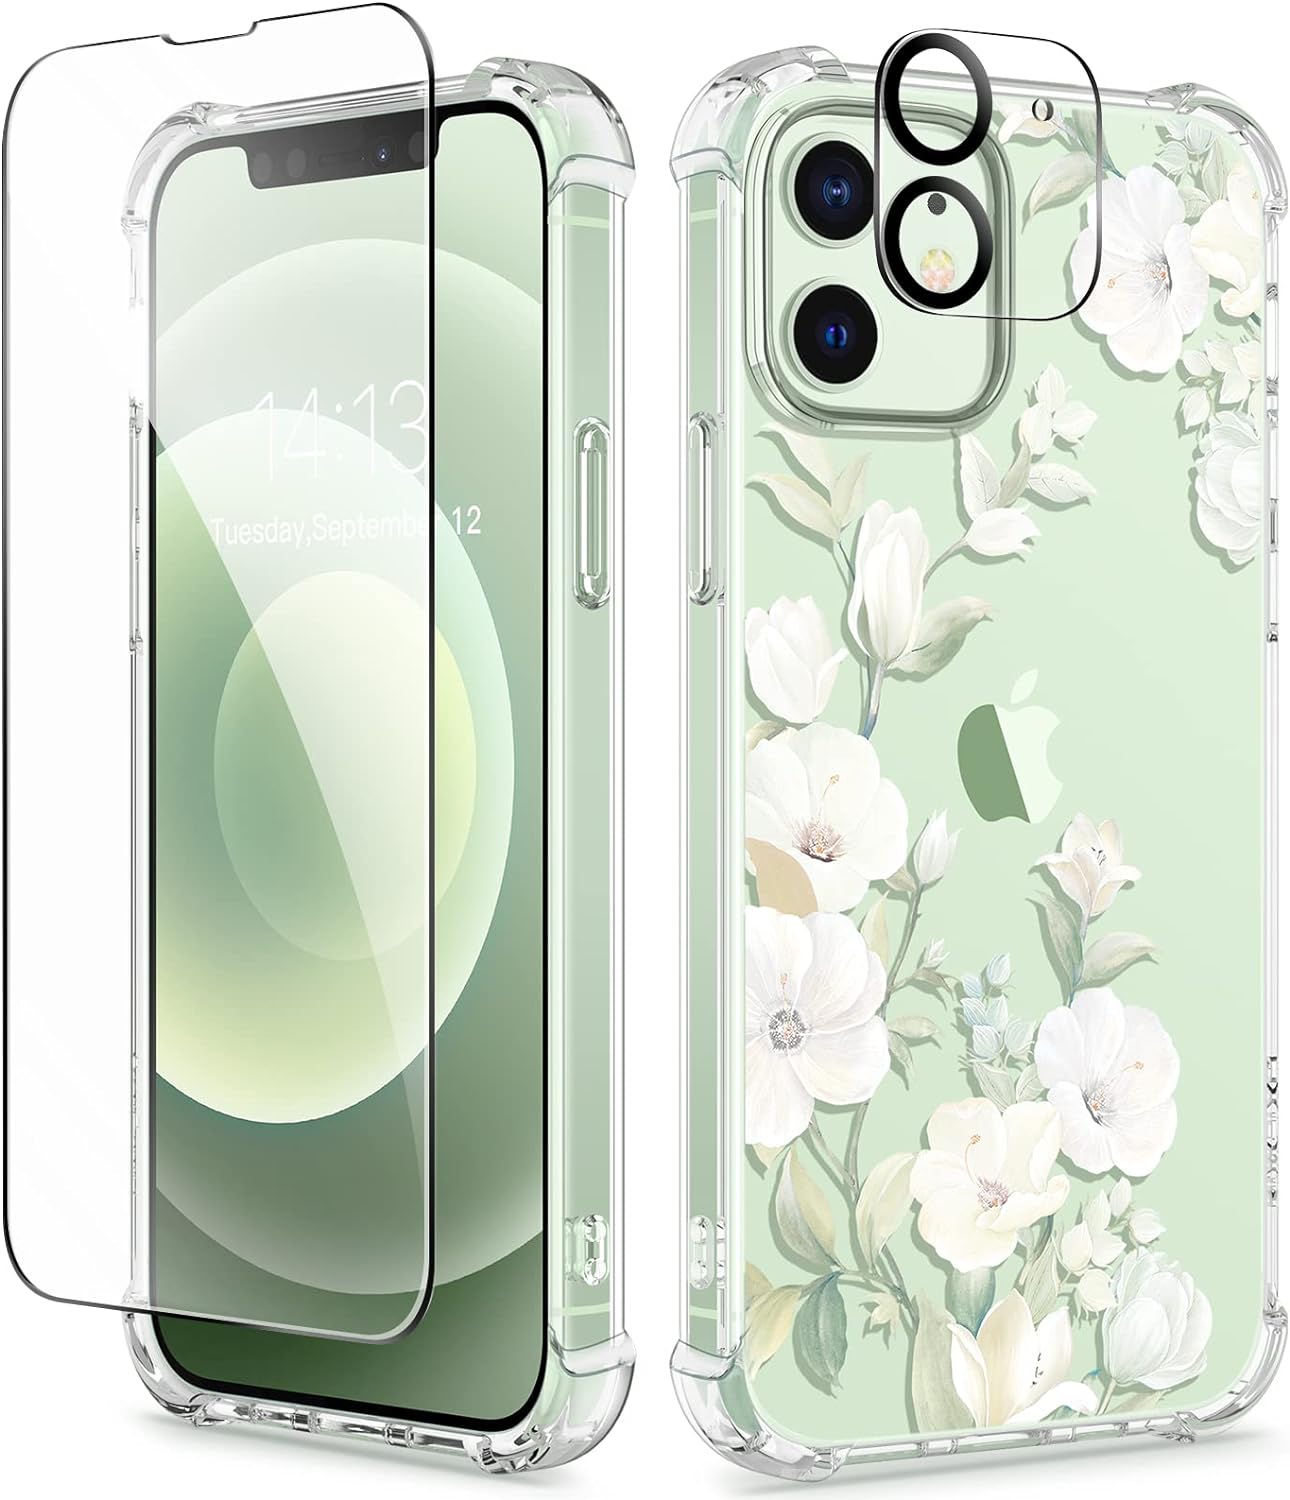 GVIEWIN for iPhone 12 Case and iPhone 12 Pro Case with Screen Protector + Camera Lens Protector, Clear Floral Flexible TPU Shockproof Cover Women Girls Flower Phone Case 6.1(Hibiscus/Green)